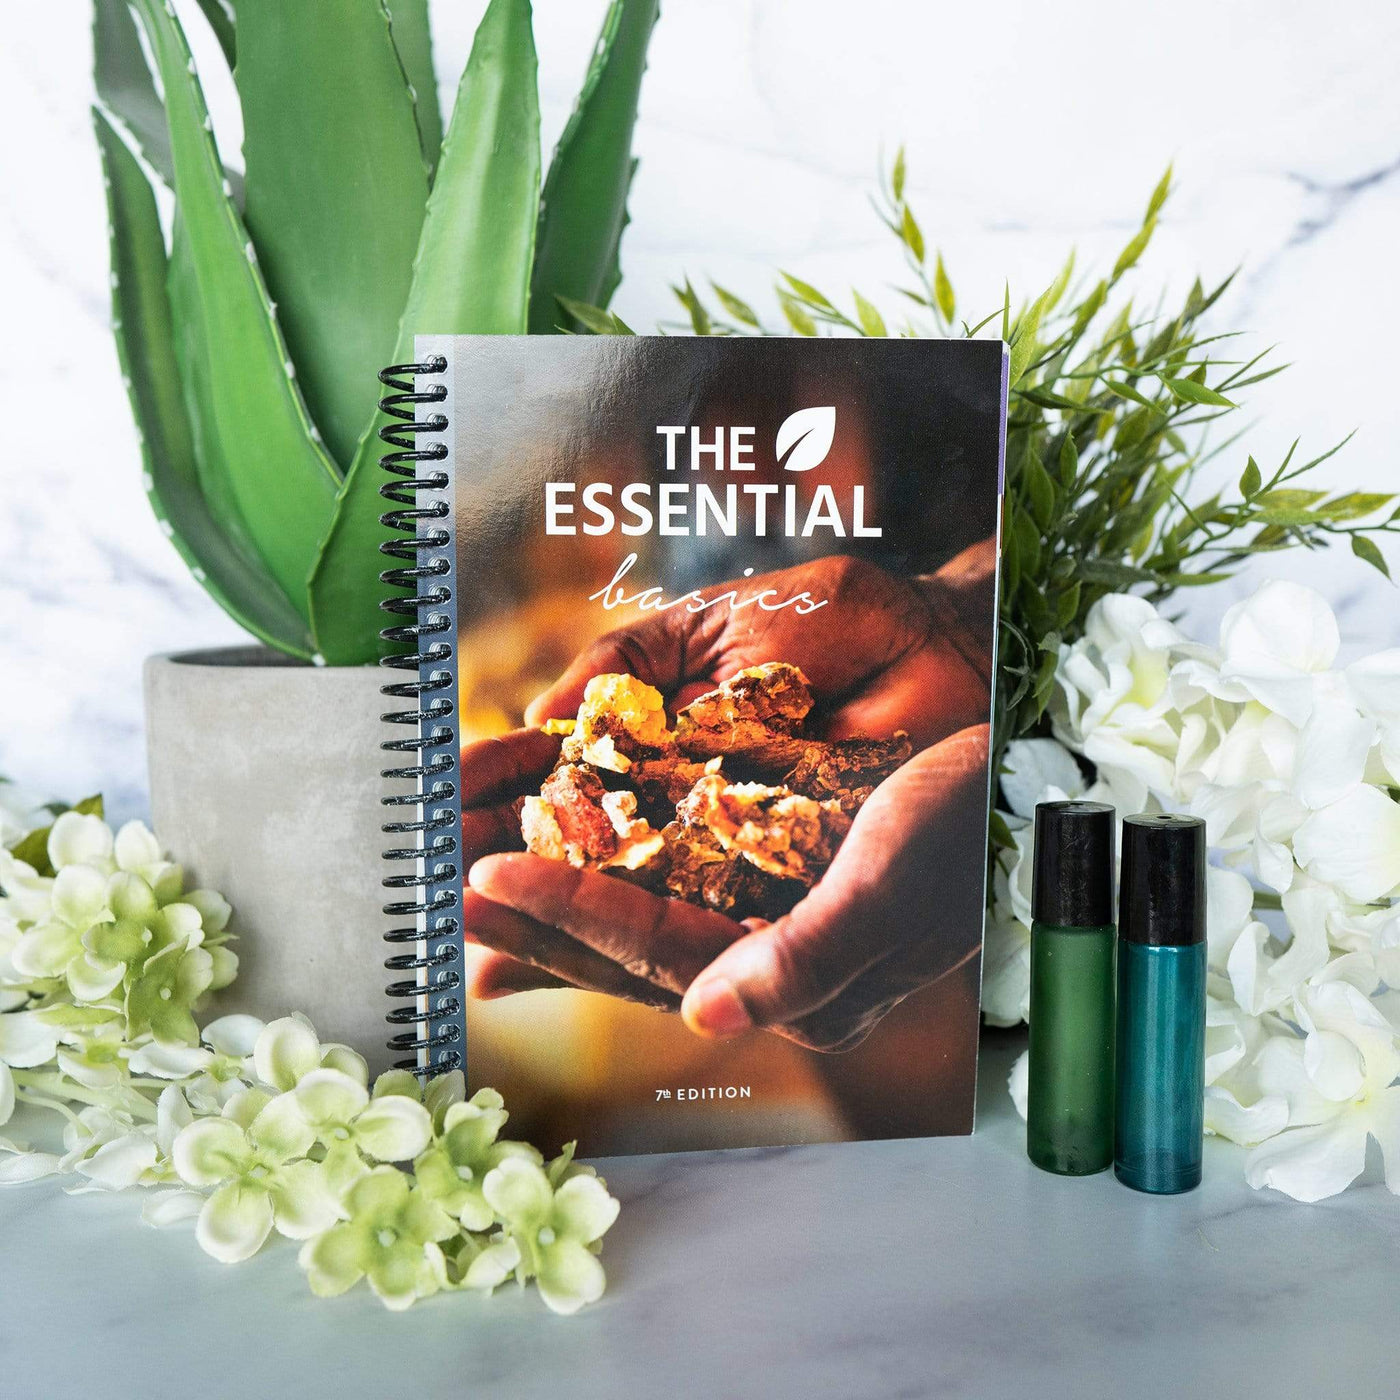 The Essential Basics Book 7th Edition – Oil Life Canada